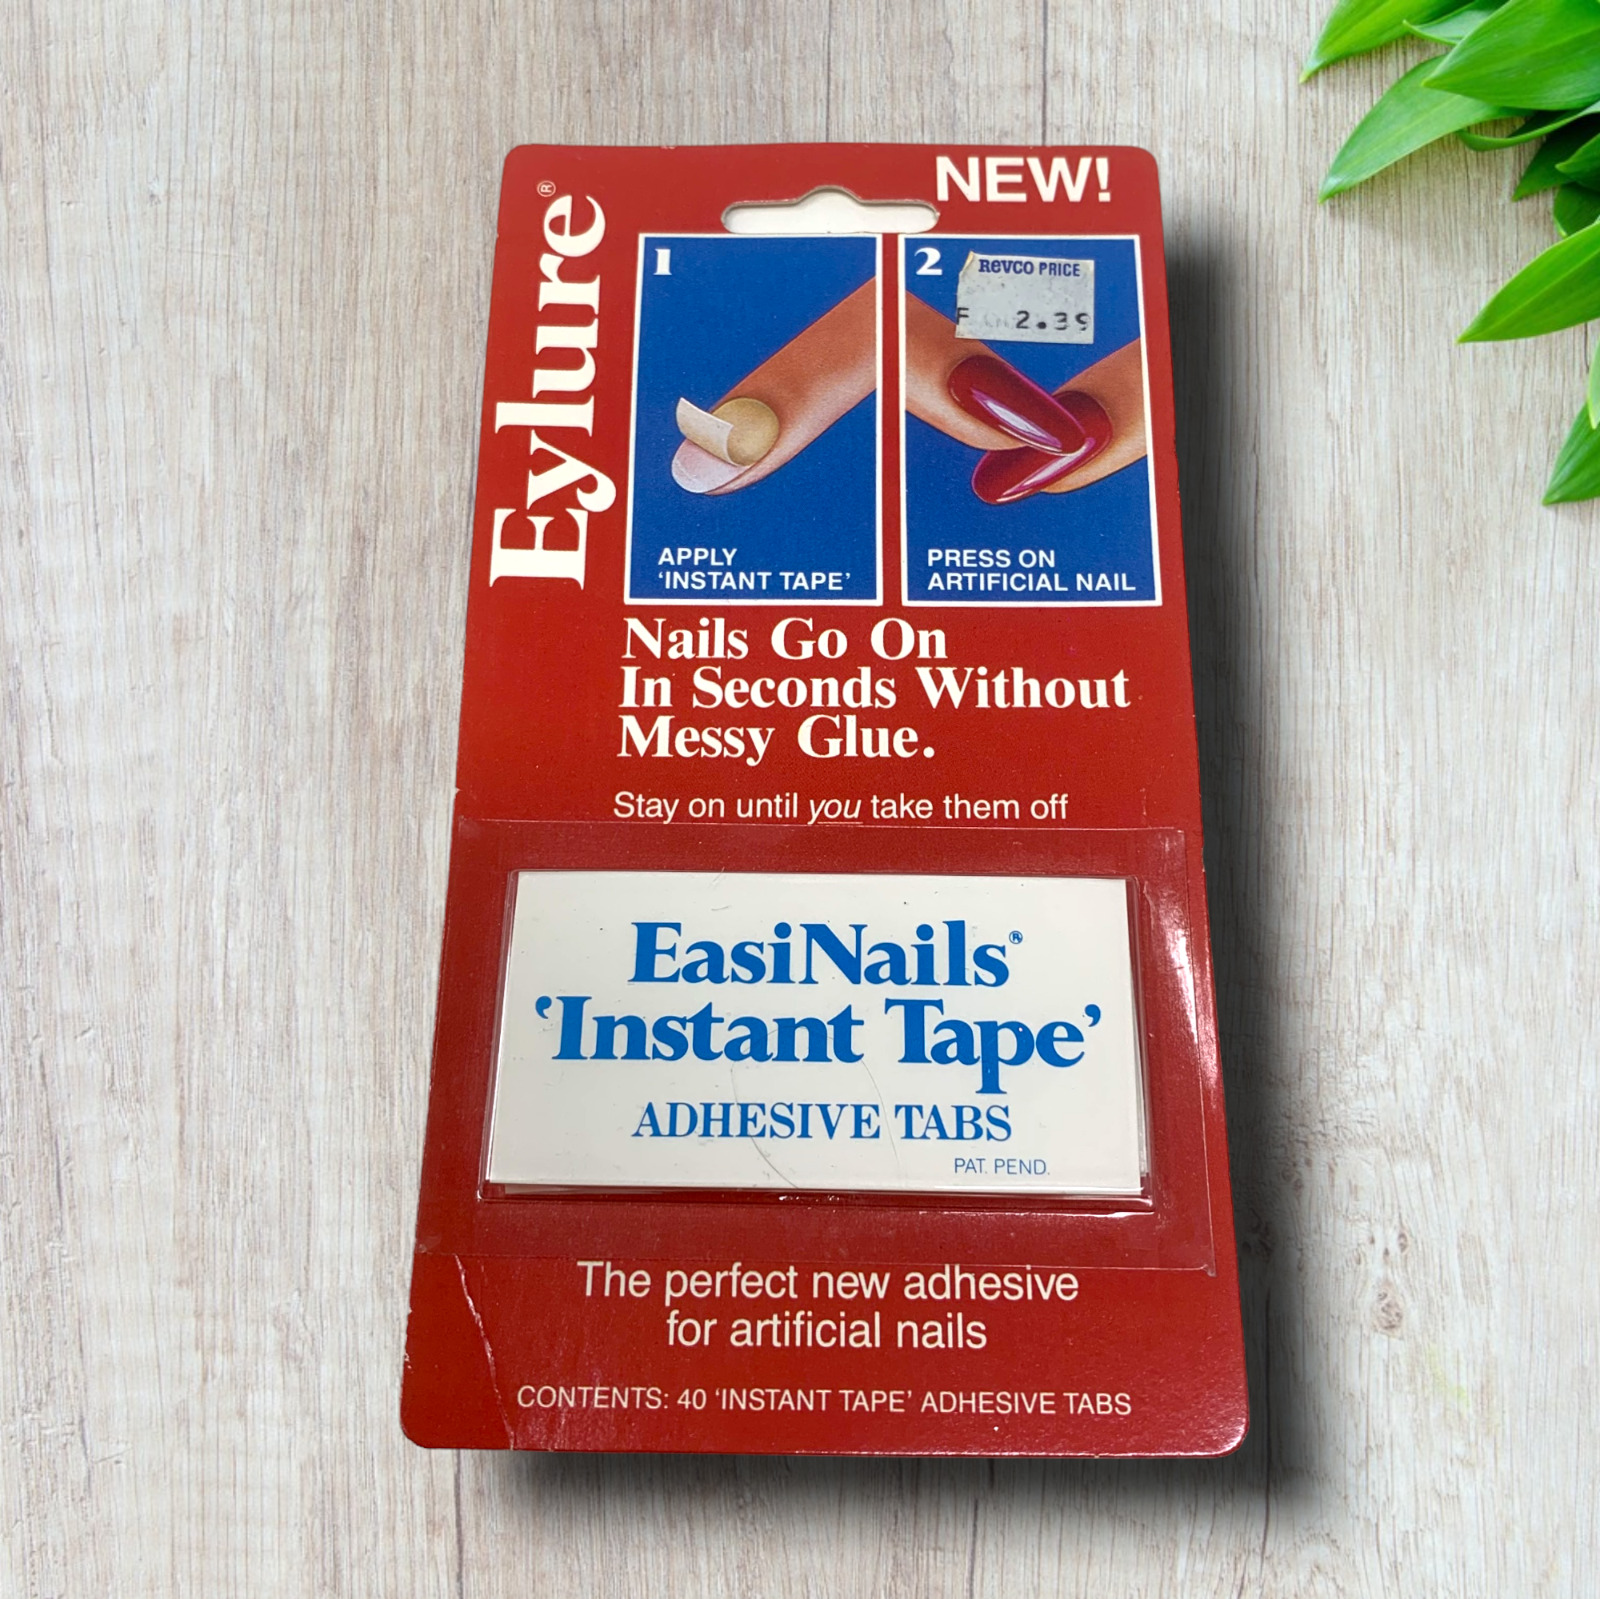 Vintage 1980\'s Eylure EasiNails Instant Tape No Messy Glue TV Movie Prop Revco